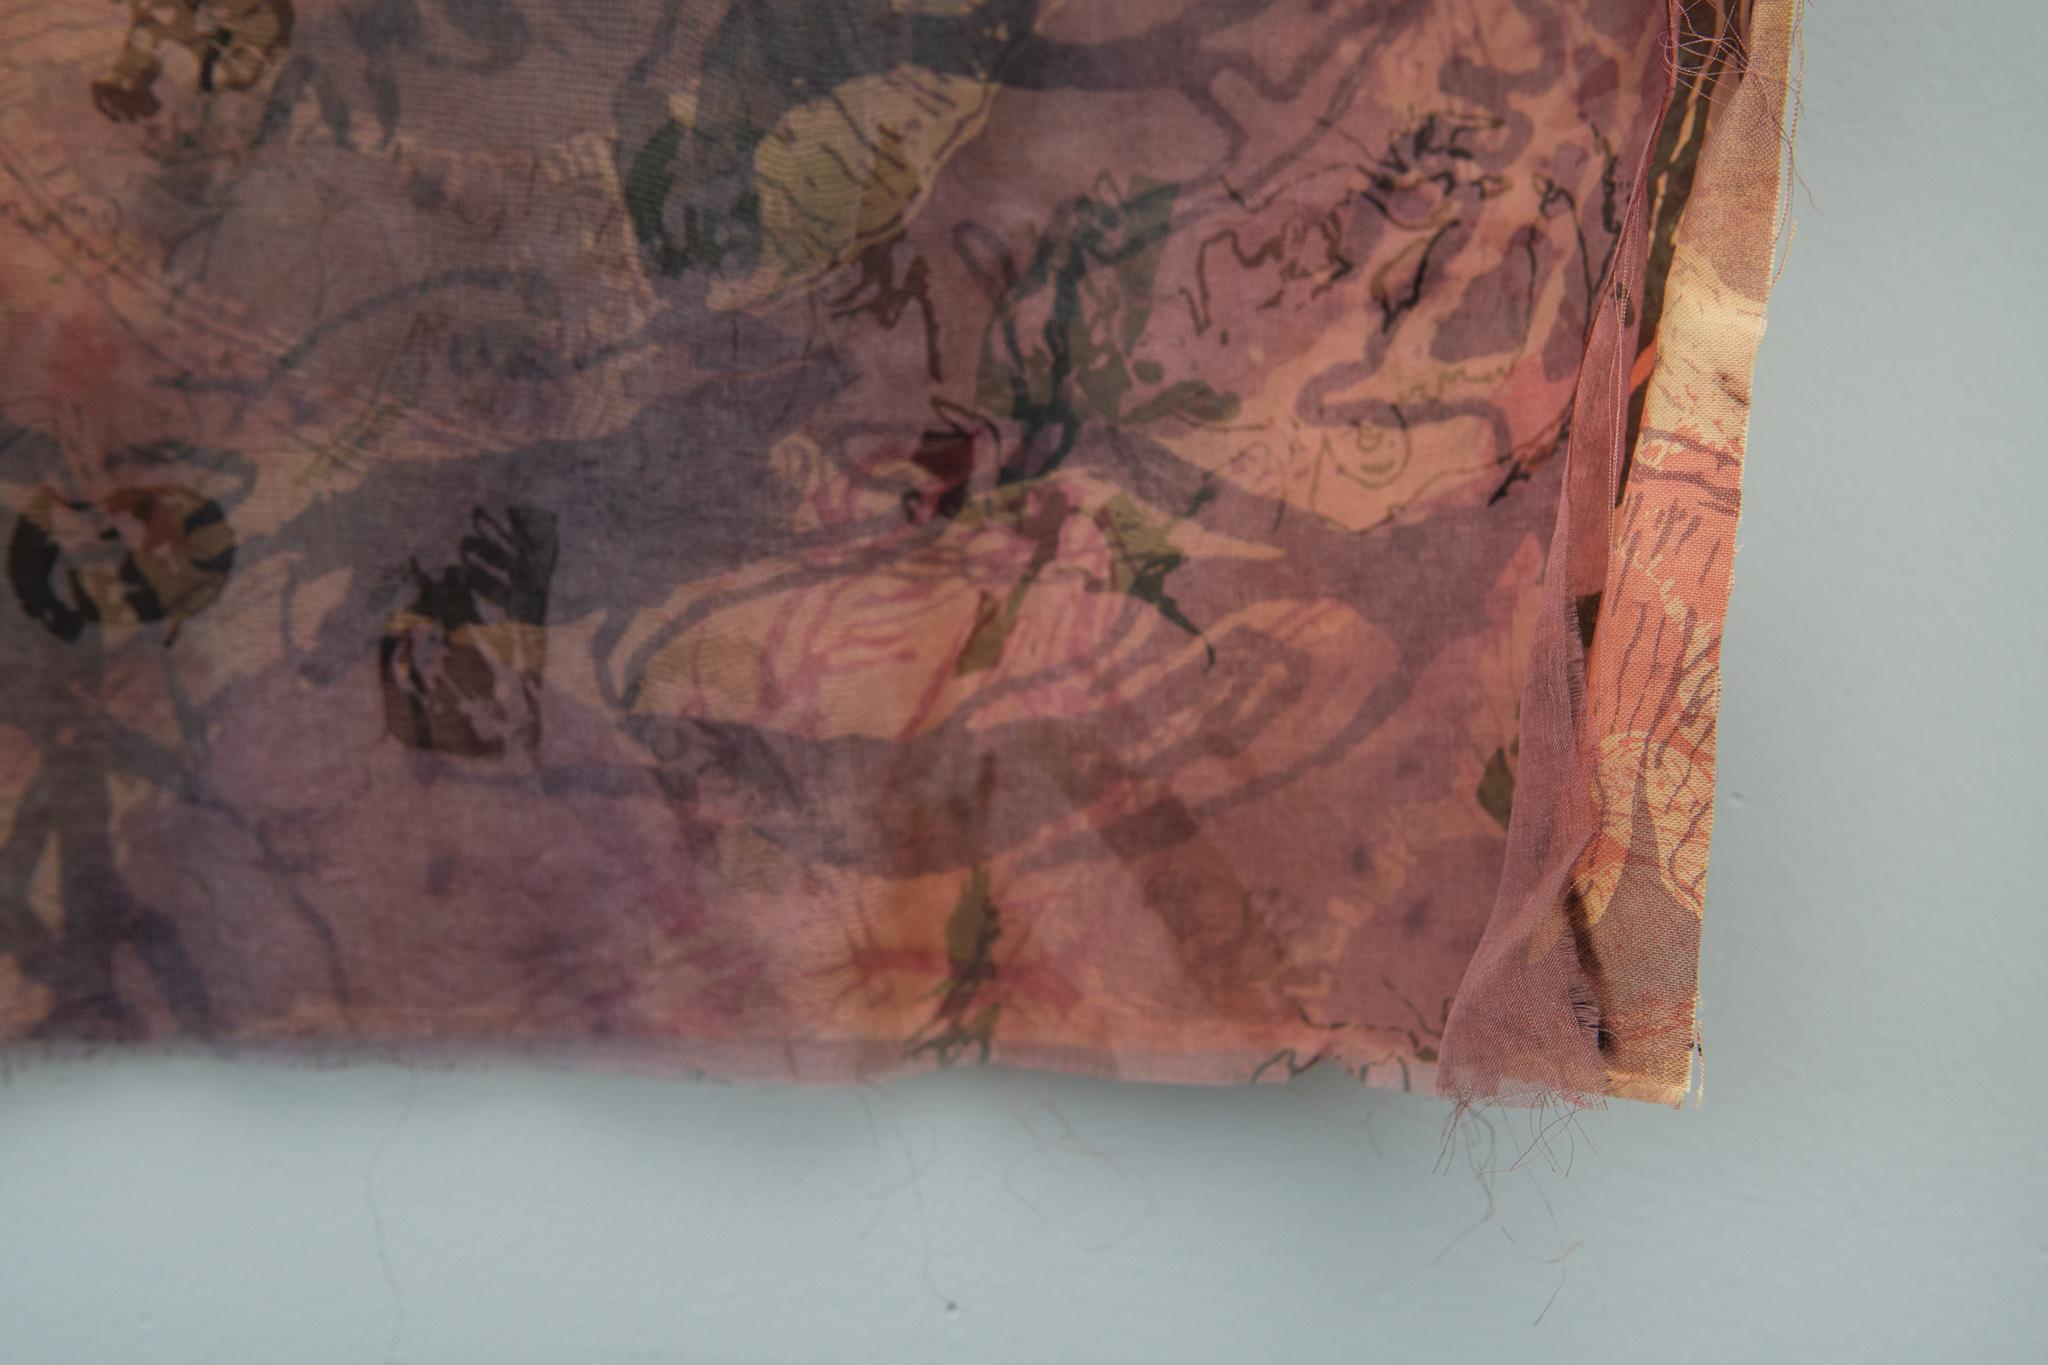 Untitled, 2014. 100% Silk Chiffon, 100% Cotton, Hand Dyed and Silk Screen Printed. Remembrance Through Cloth Collection, 590 x 870mm

Born in Namibia, Lynette Diergaardt received her Bachelors of Art from the University of Namibia and her Masters in